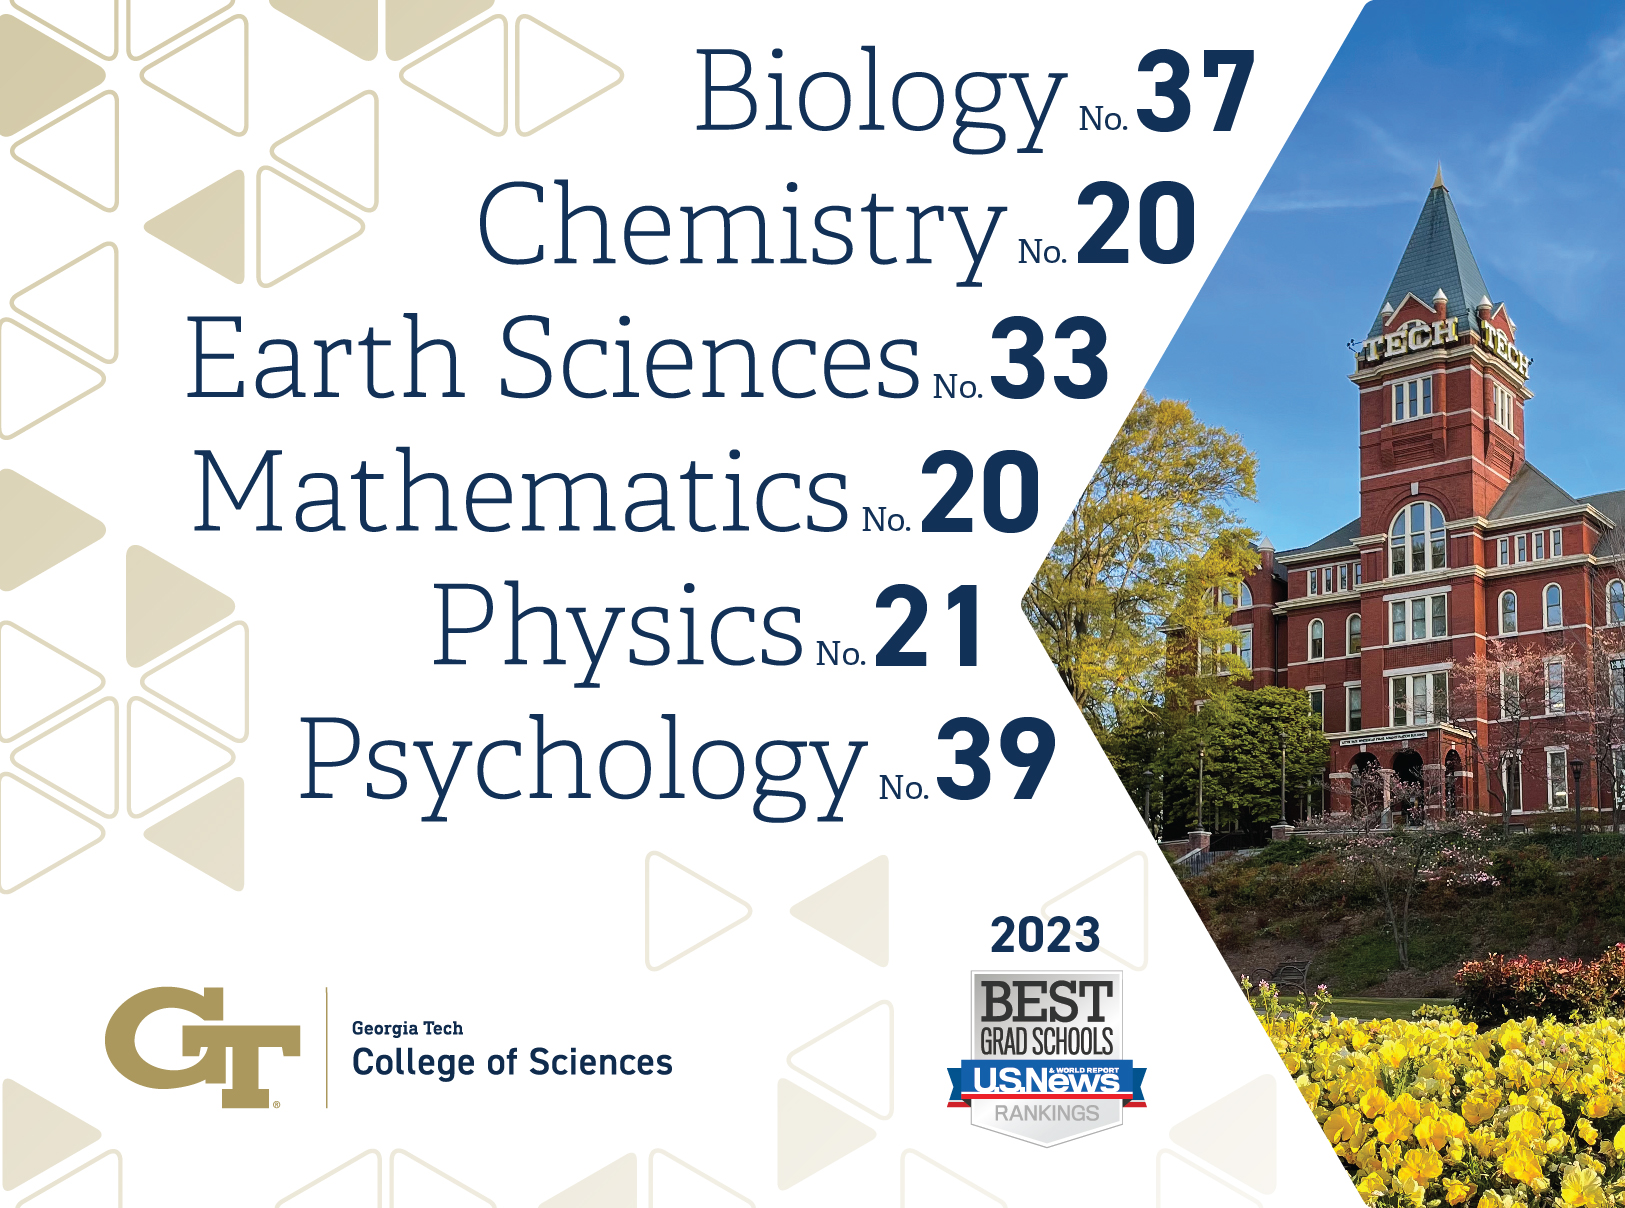 U.S. News and World Report continues to rank all six College of Sciences schools among its best science schools for graduate studies.